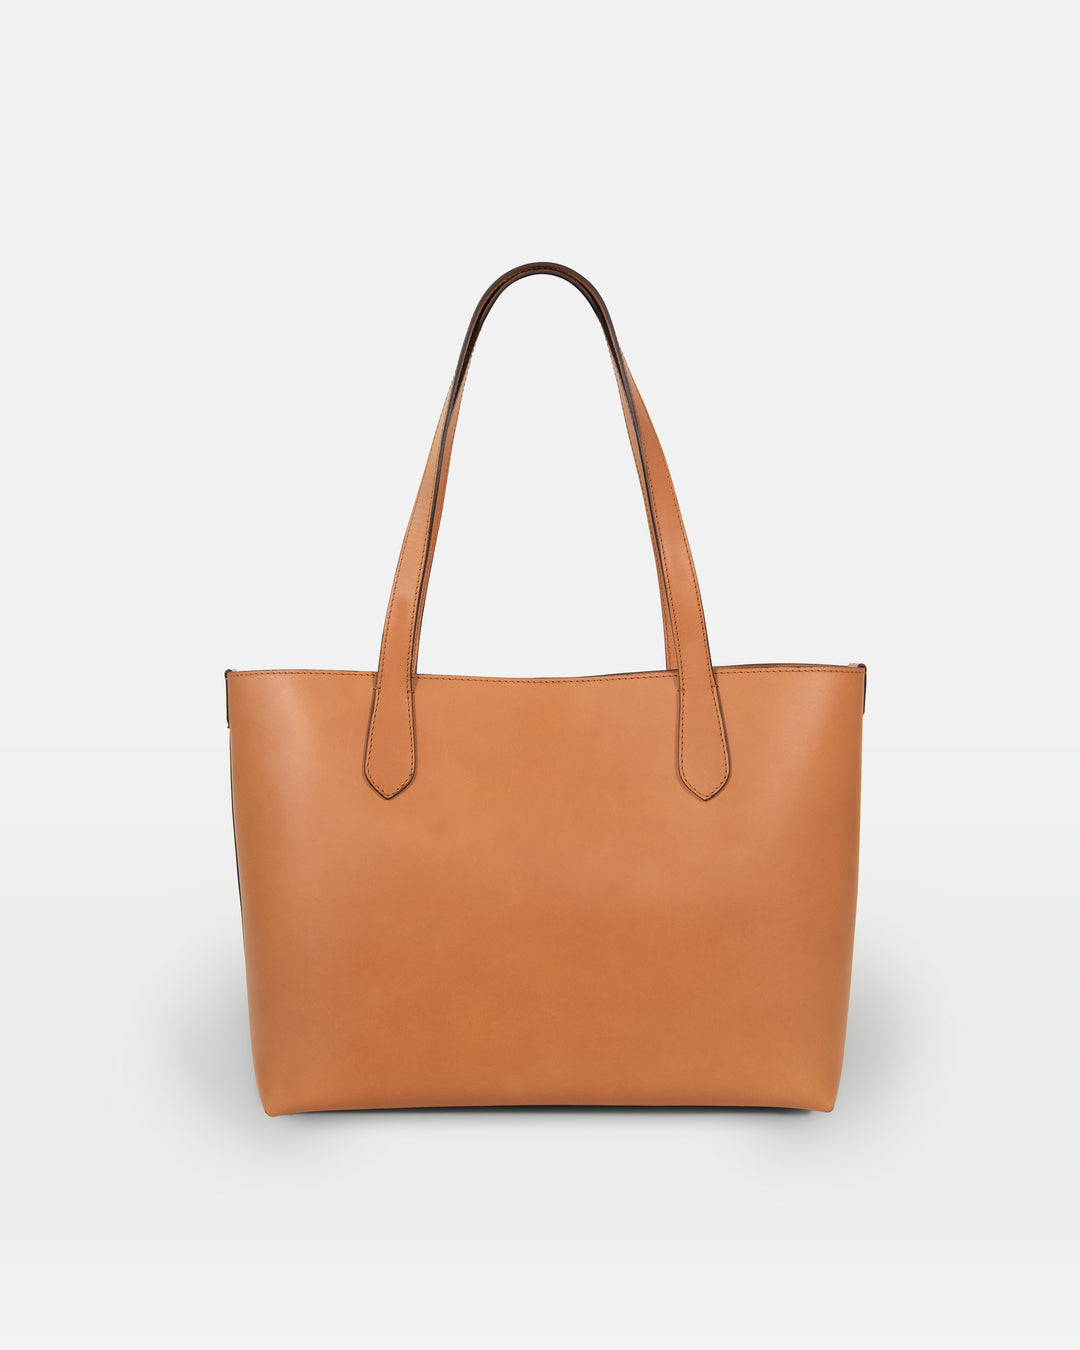 MODHER tote bag in naturale vegetable tanned Italian leather#color_naturale